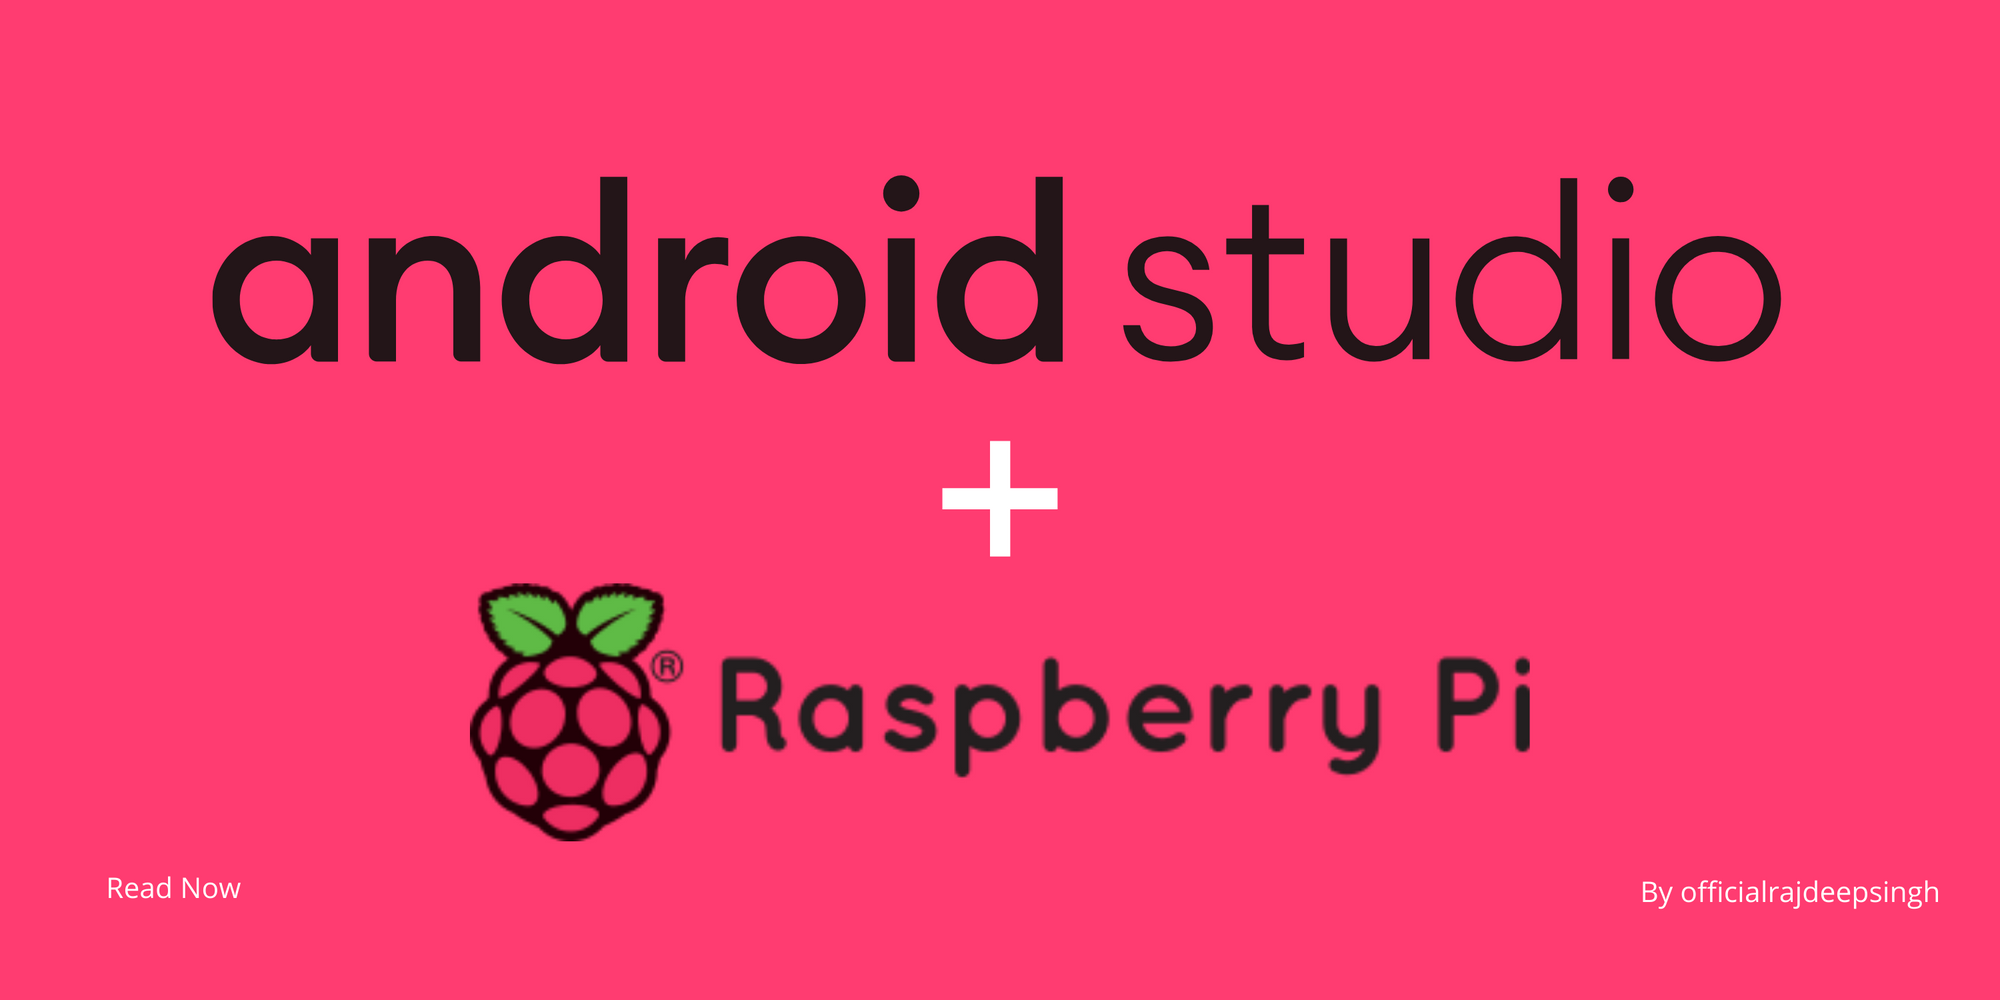 Install android studio in Raspberry pi 4